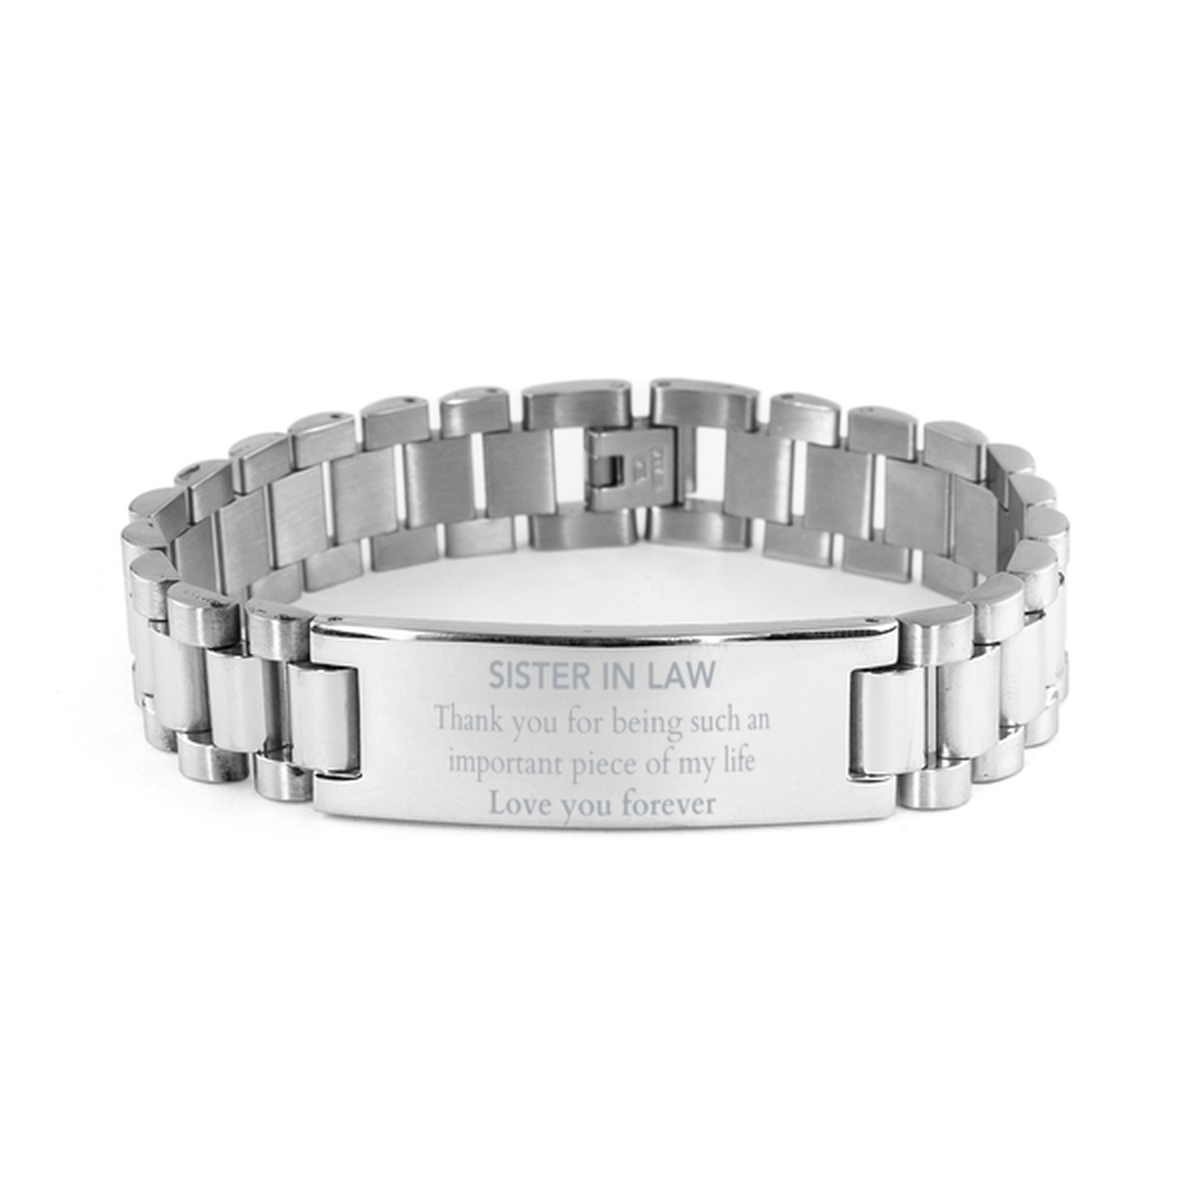 Appropriate Sister In Law Ladder Stainless Steel Bracelet Epic Birthday Gifts for Sister In Law Thank you for being such an important piece of my life Sister In Law Christmas Mothers Fathers Day